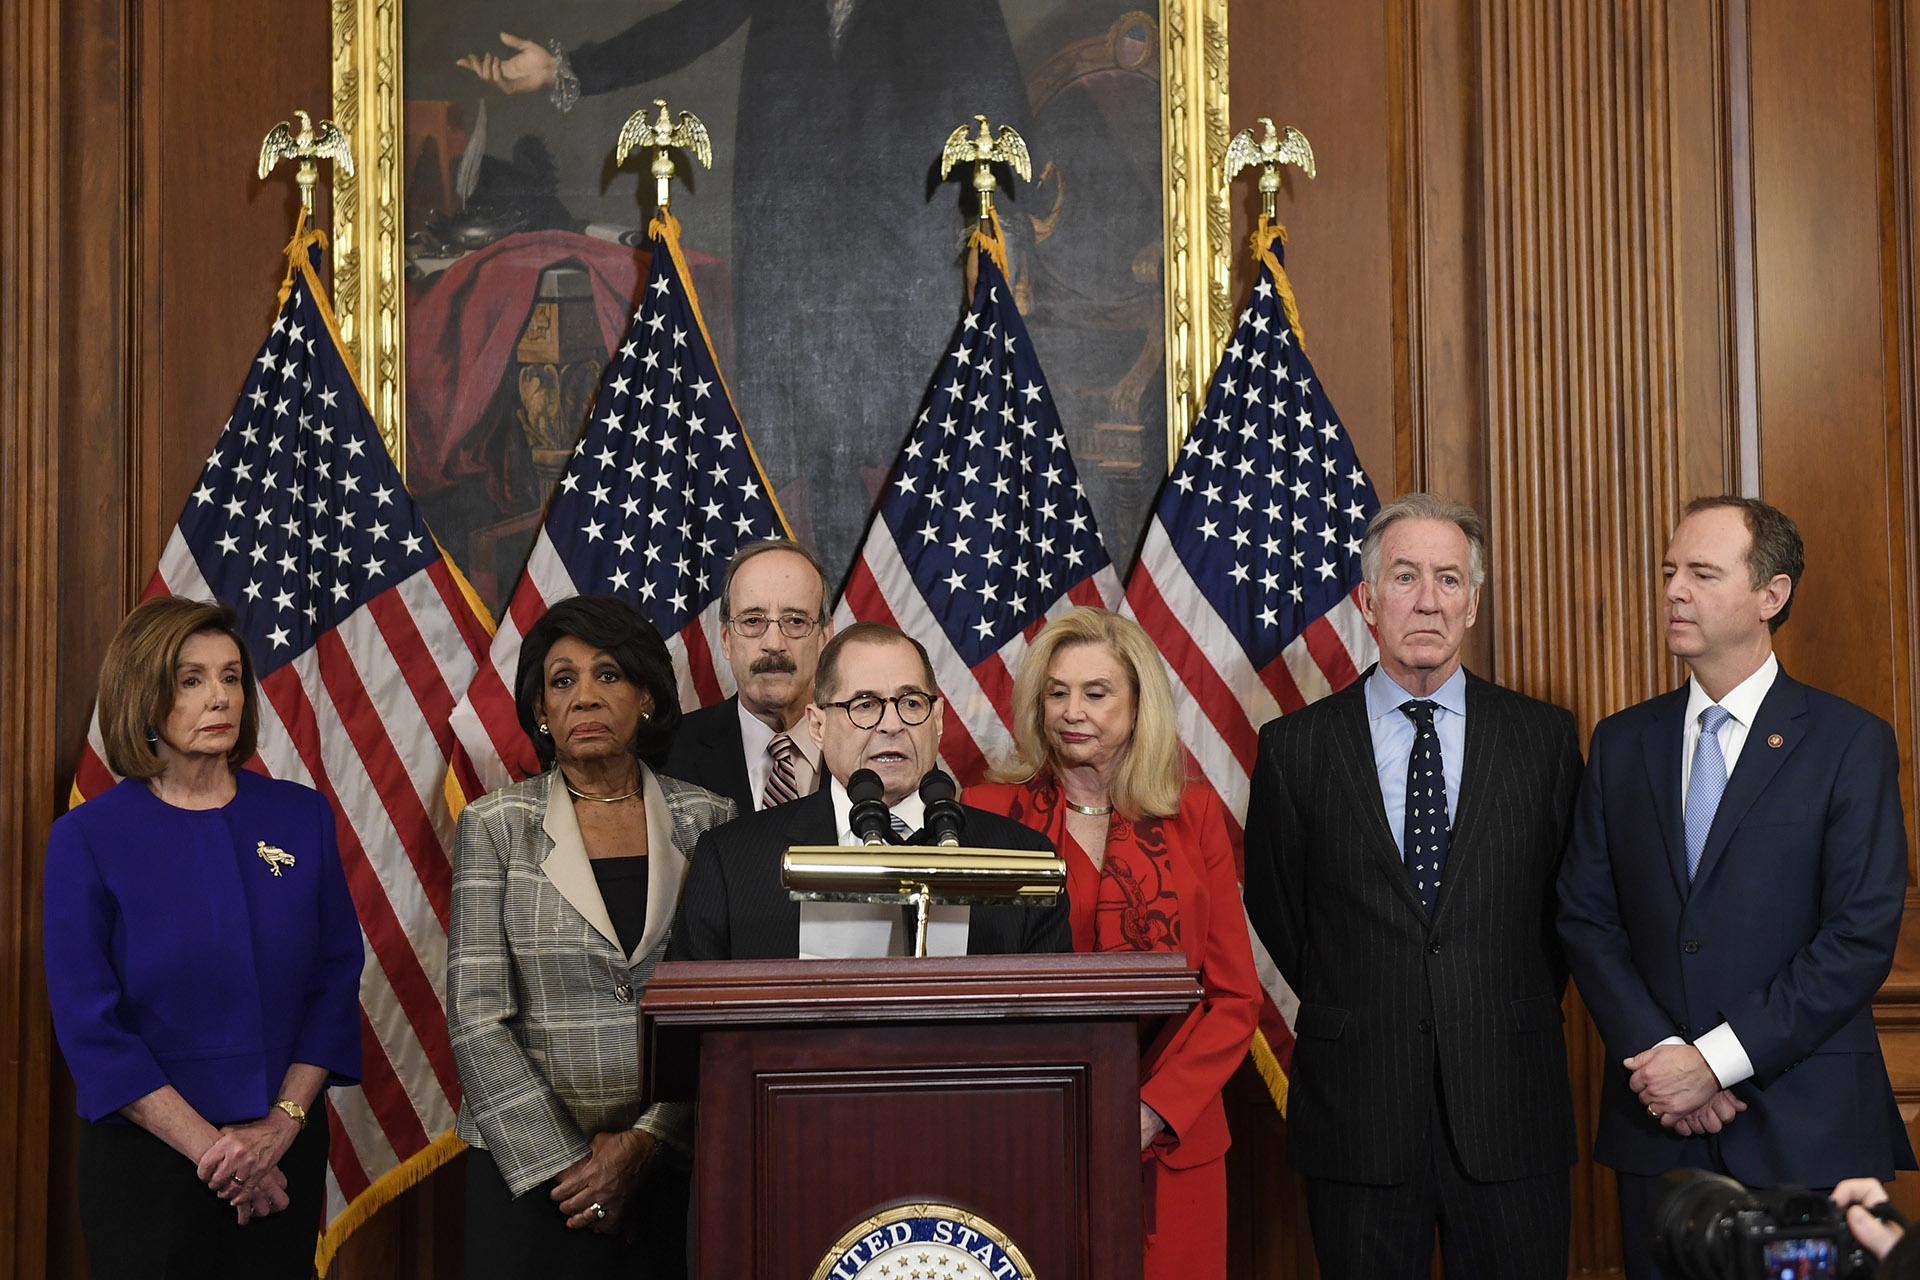 From left House Speaker Nancy Pelosi, Chairwoman of the House Financial Services Committee Maxine Waters, D-Calif., Chairman of the House Foreign Affairs Committee Eliot Engel, D-N.Y., House Judiciary Committee Chairman Jerrold Nadler, D-N.Y., Chairwoman of the House Committee on Oversight and Reform Carolyn Maloney, D-N.Y., House Ways and Means Chairman Richard Neal and Chairman of the House Permanent Select Committee on Intelligence Adam Schiff, D-Calif., unveil articles of impeachment against President D